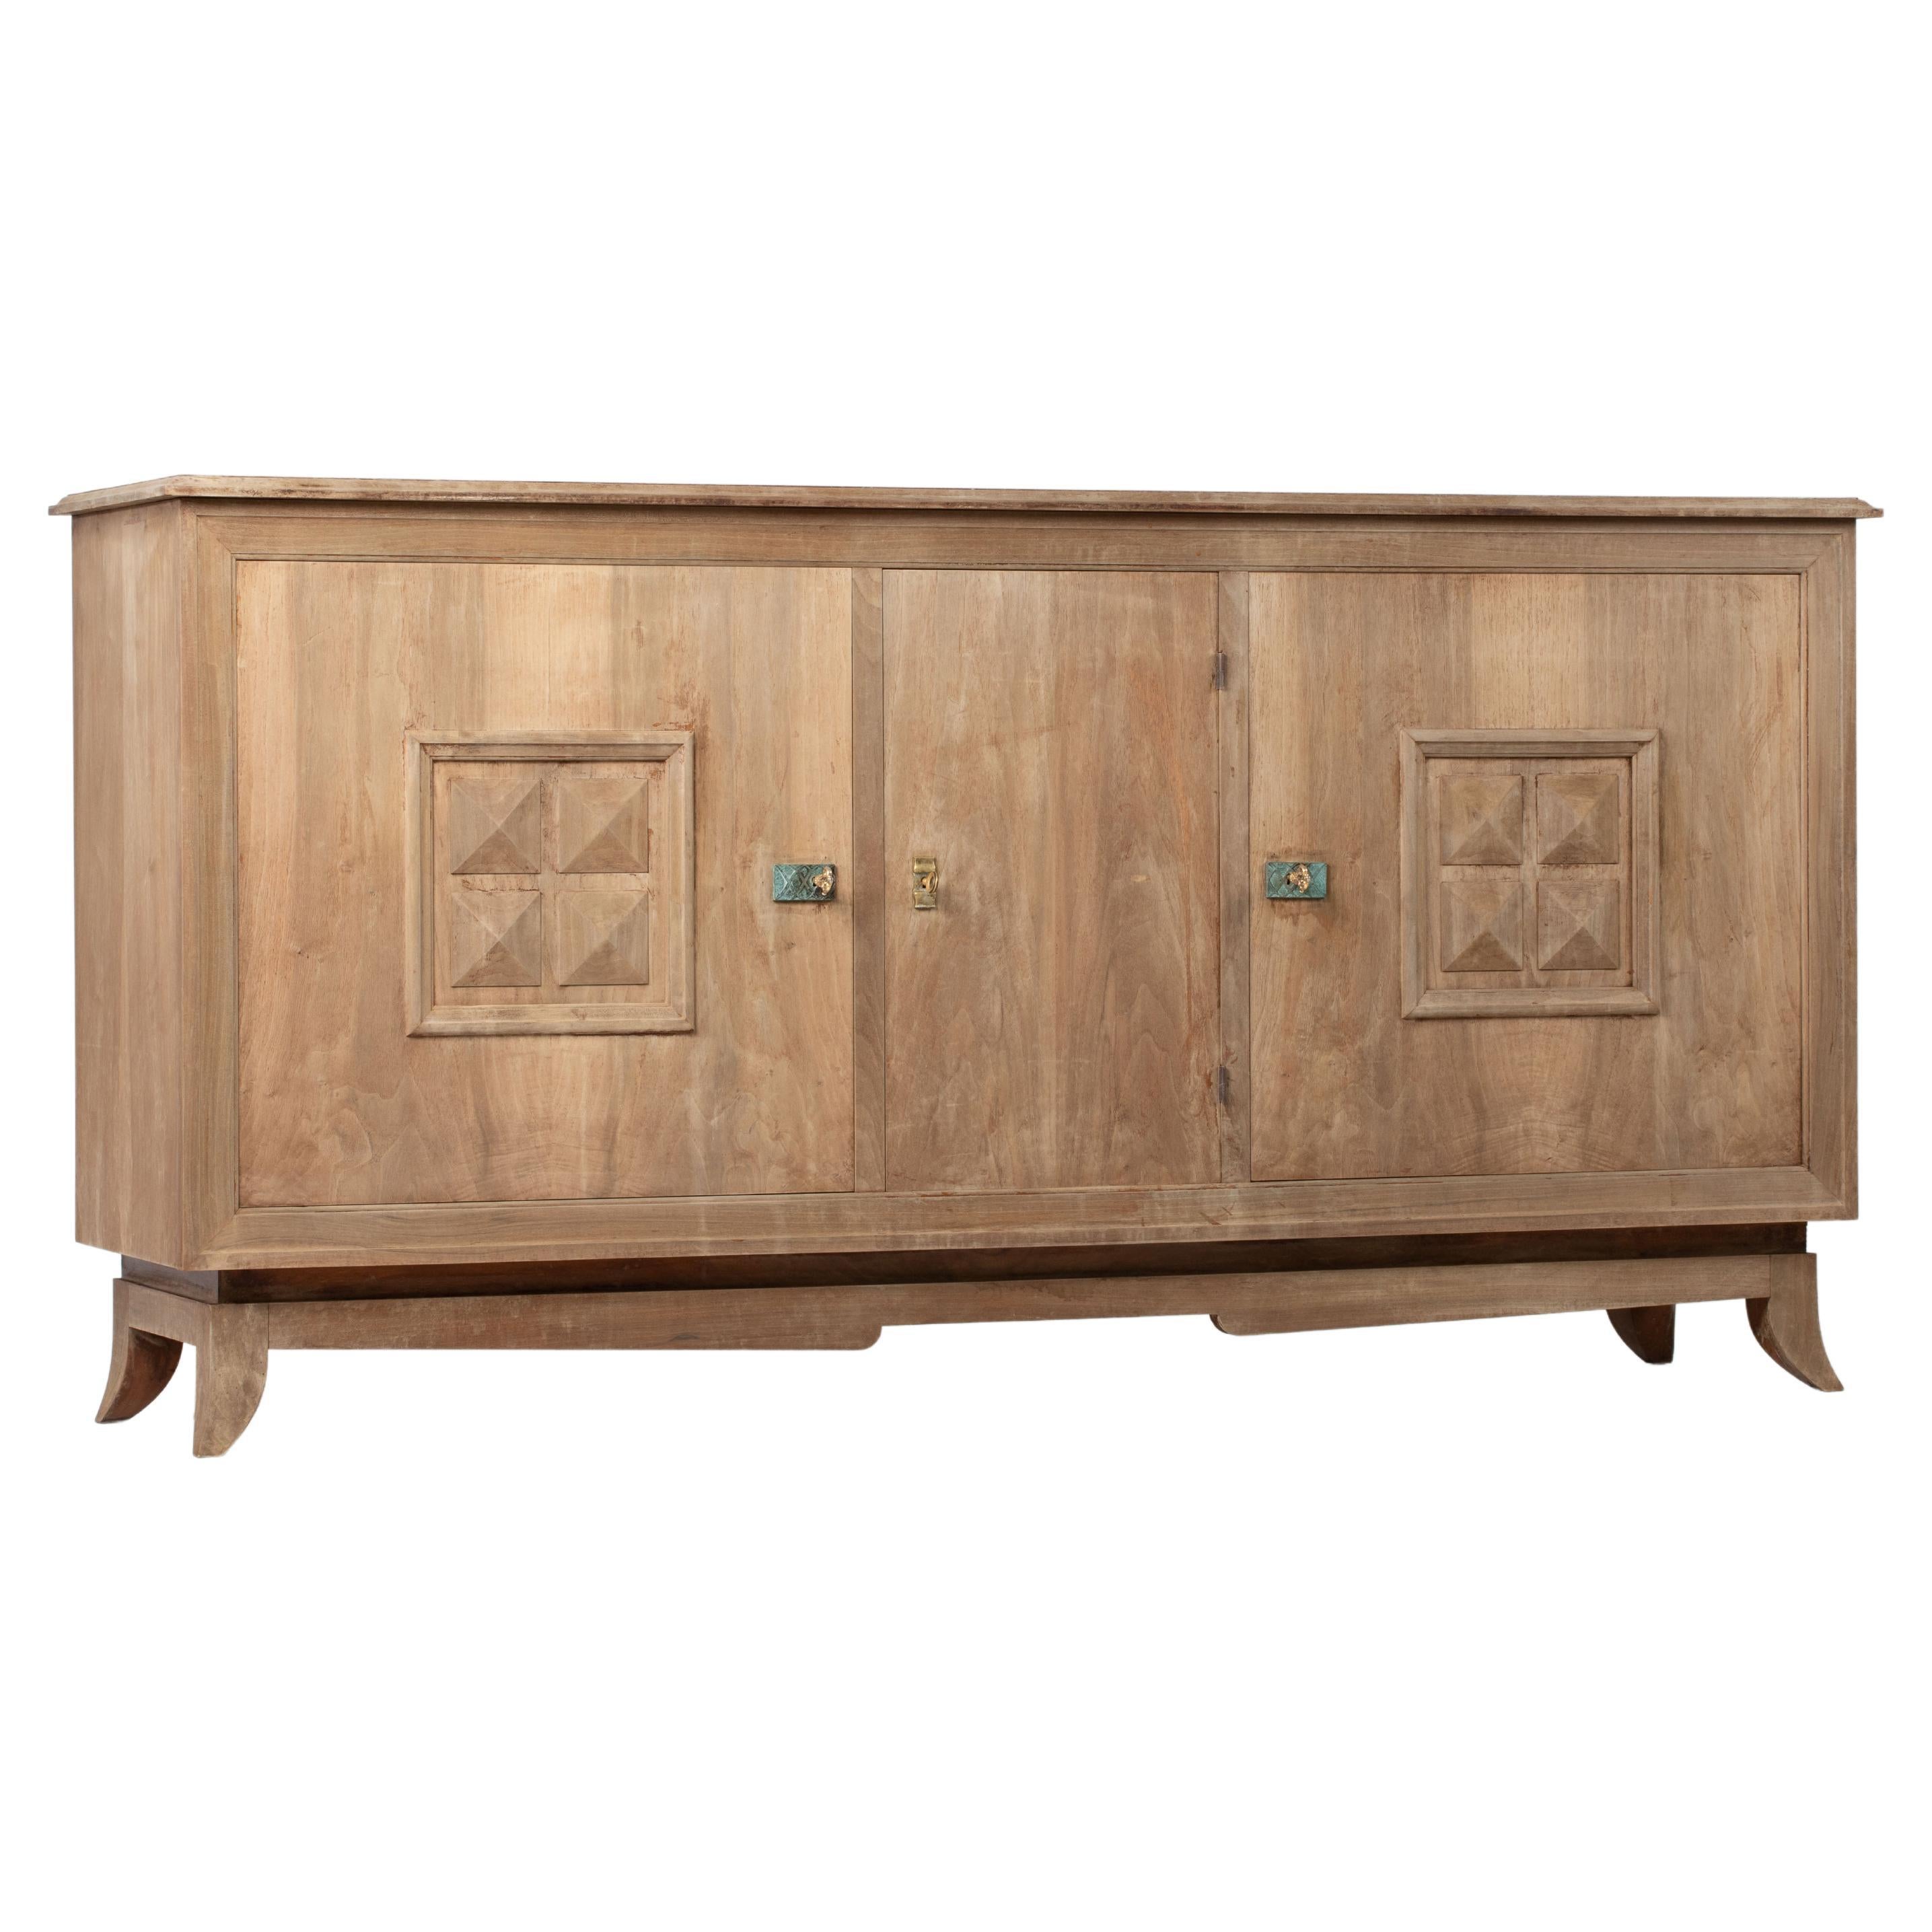 Bleached solid oak credenza, France, 1940s.
Large mid-century Brutalist sideboard. 
The credenza consists of three central storage facilities and covered with very detailed designed doors. 

